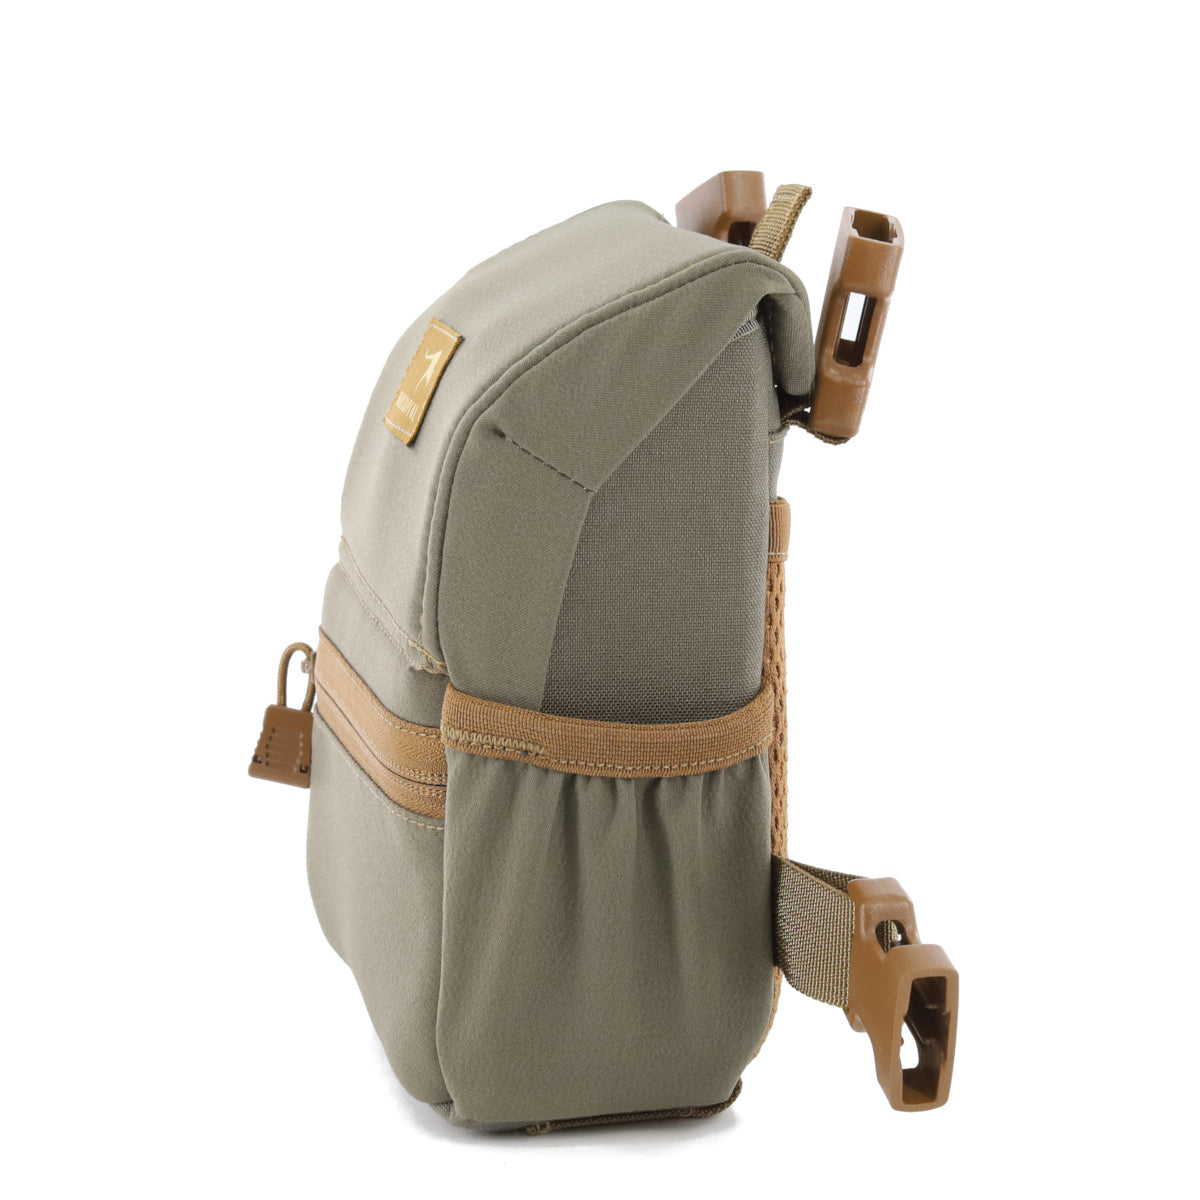 Enclosed Binocular Pack - Bag Only/No Harness